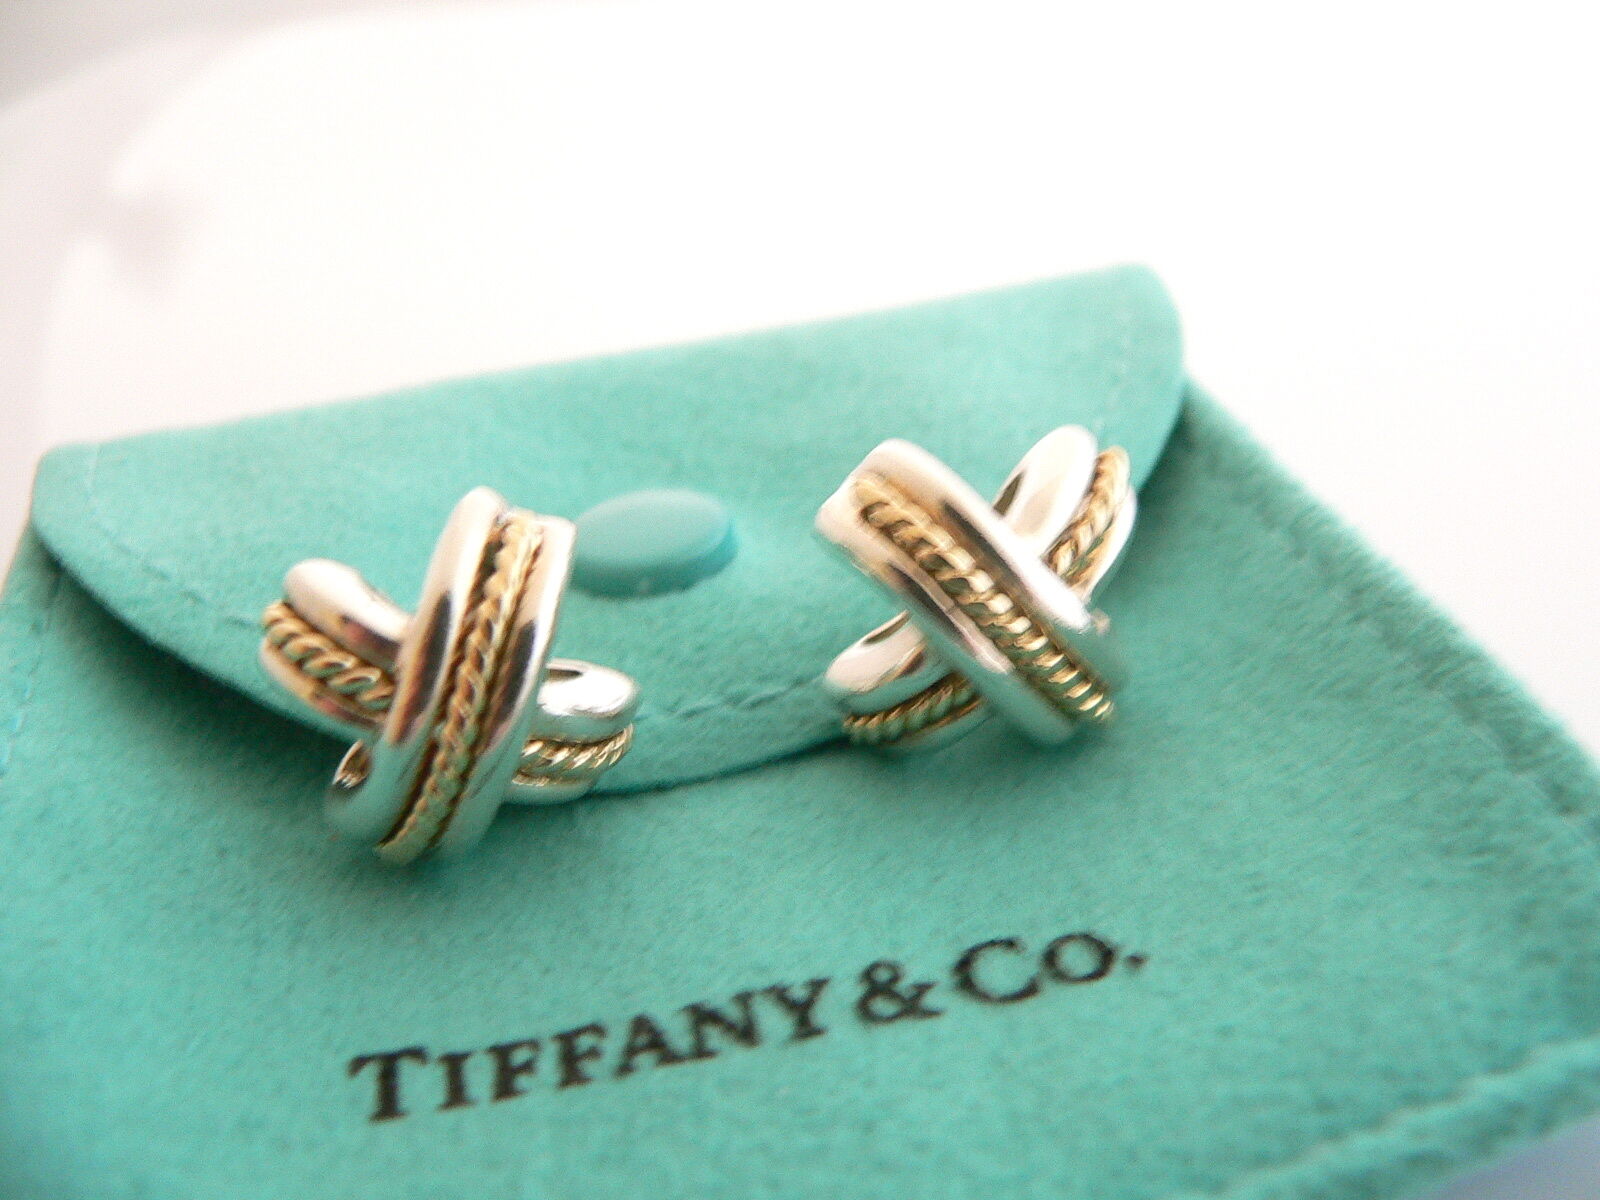 Tiffany & Co Silver 18K Gold Signature X Earrings Pierced Studs Gift Pouch Love